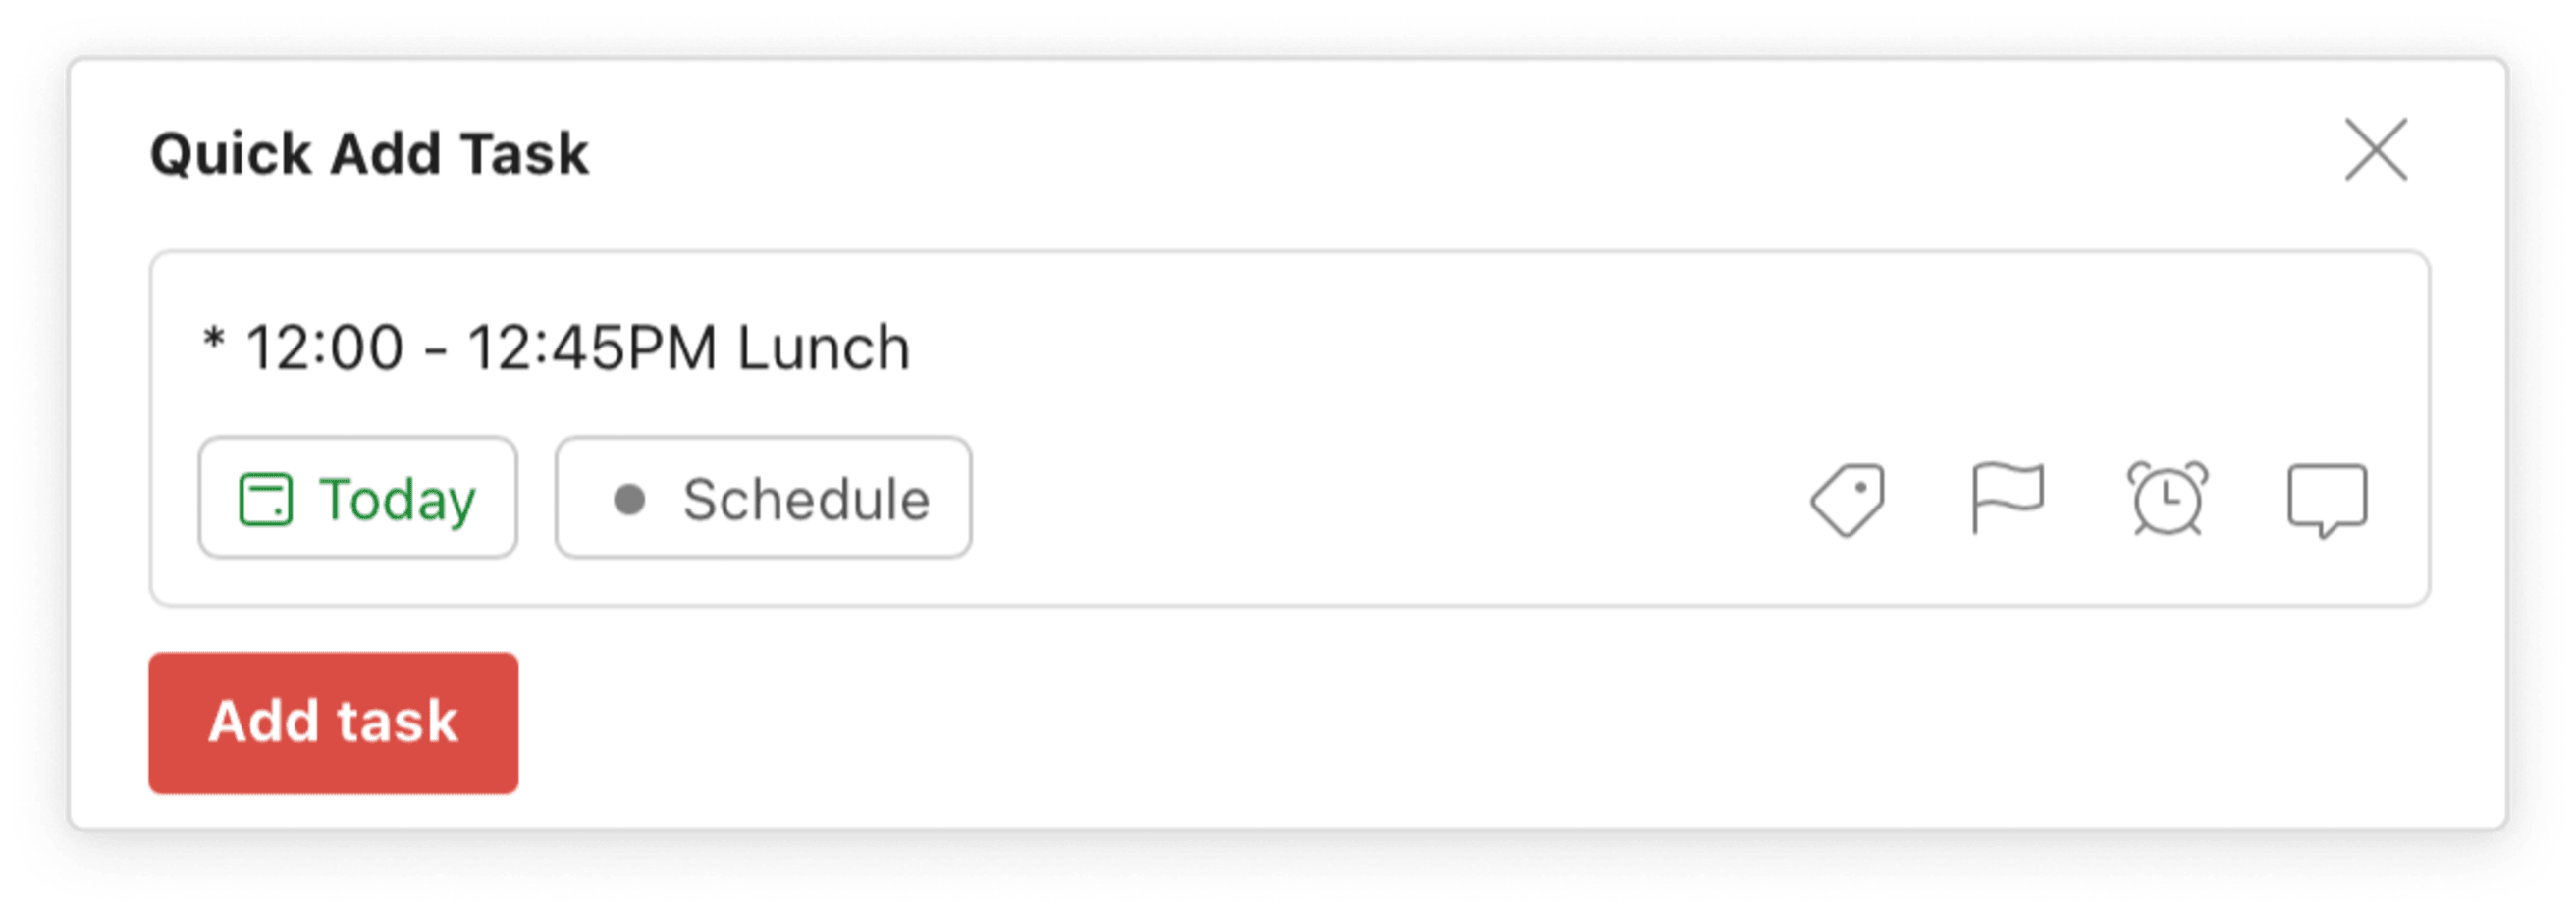 A view of Todoist's quick add feature, with &quot;* 12:00 - 12:45PM Lunch&quot; being typed